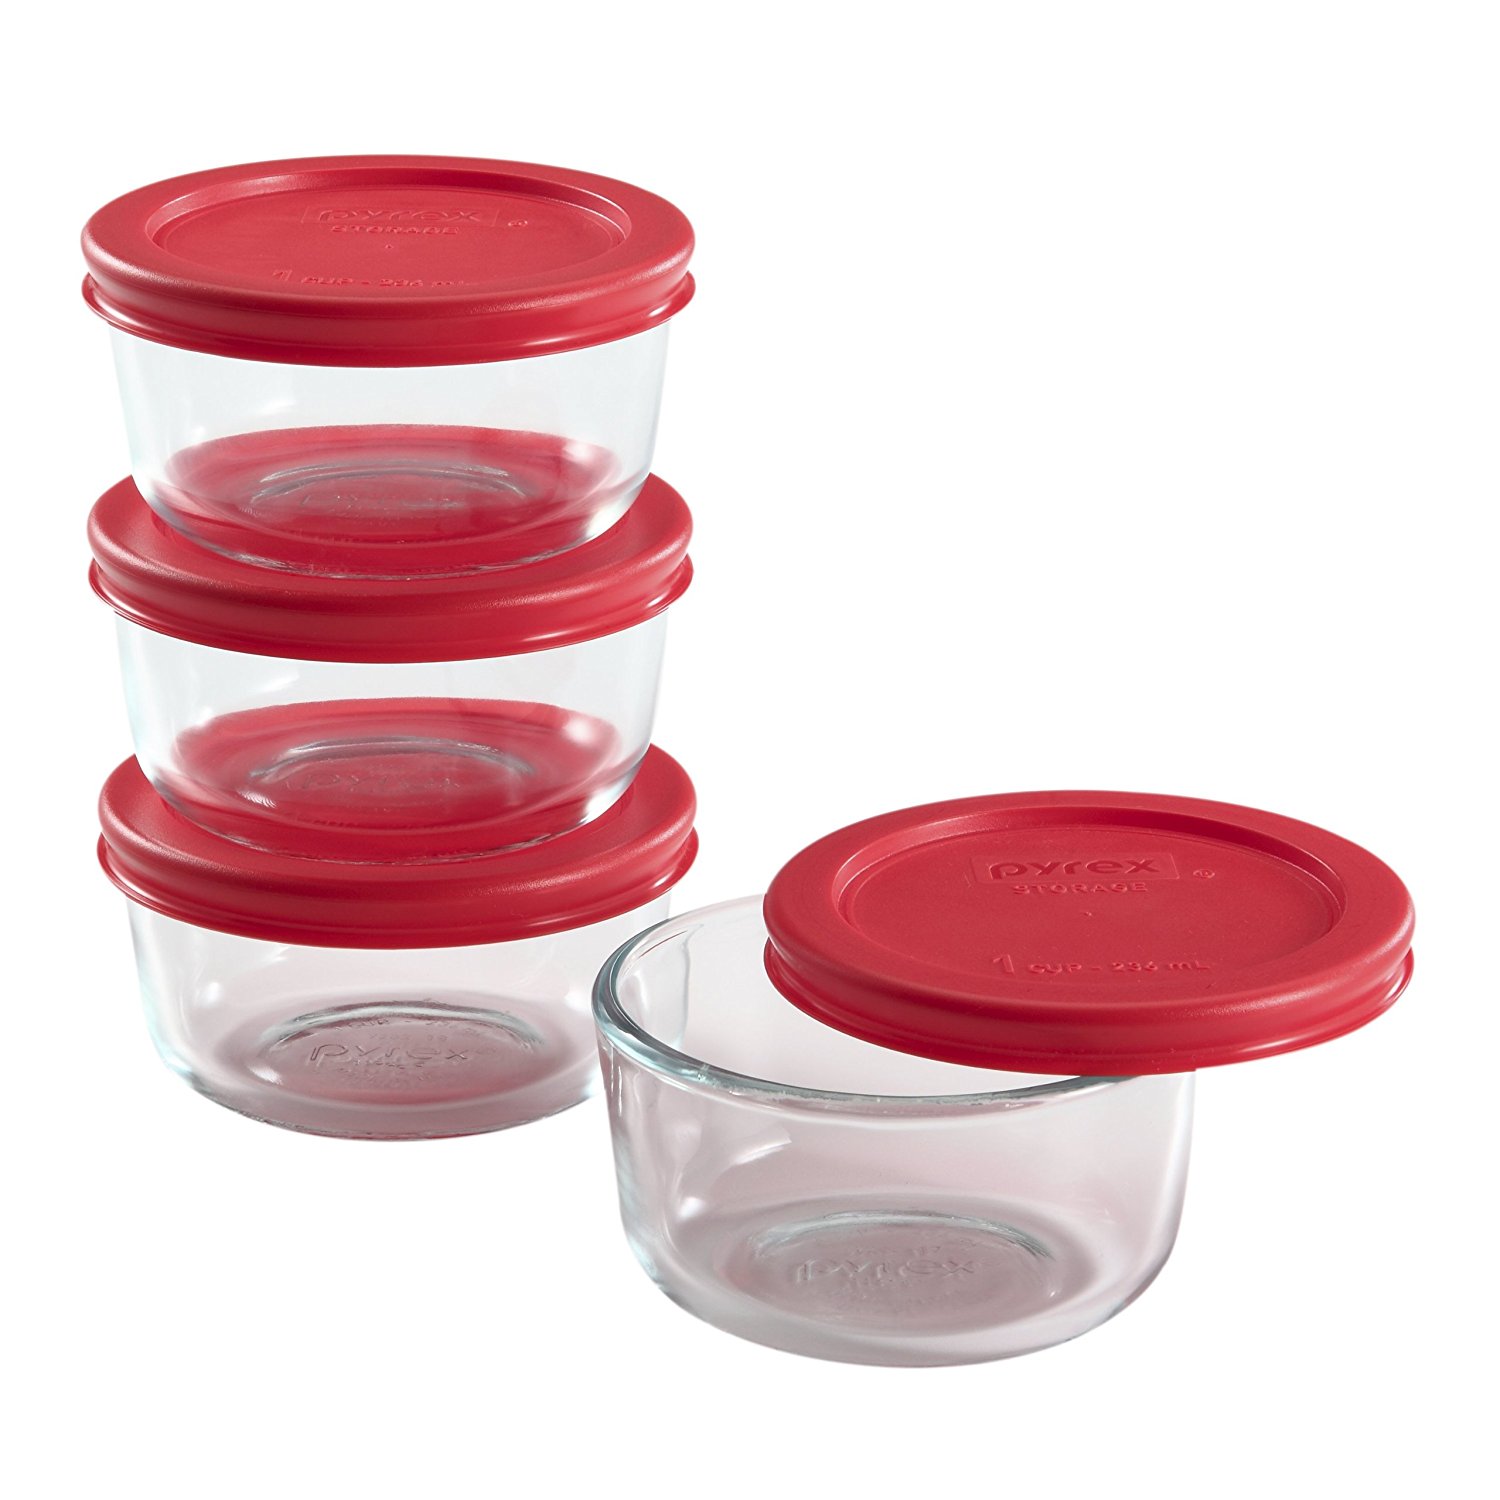 Pyrex Simply Store 8-Piece Glass Food Storage Set – Just $9.99!